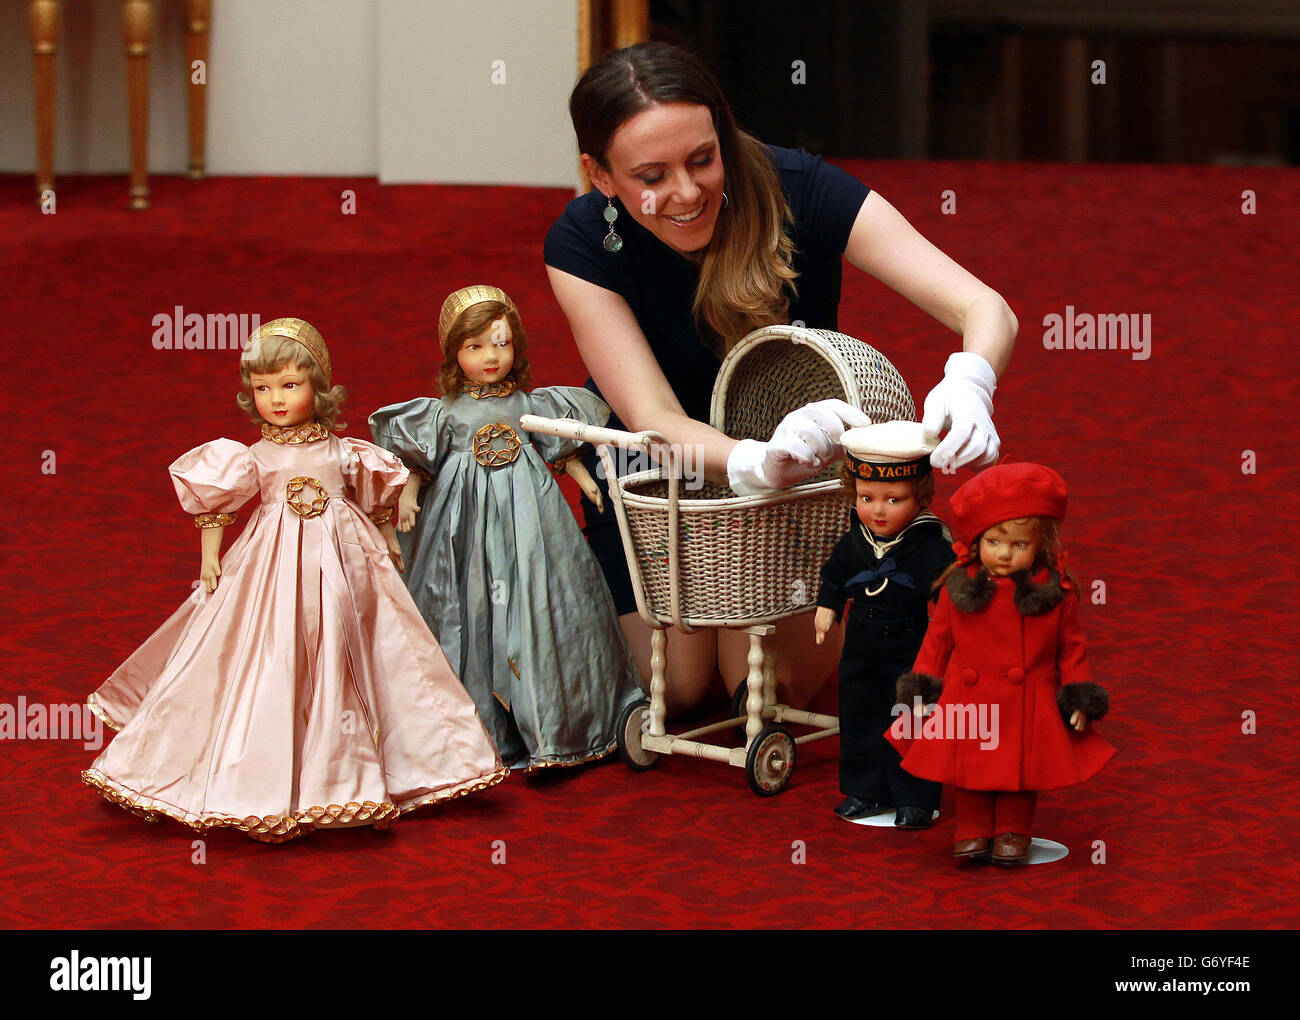 Curator Anna Reynolds holds Parisian dolls that belonged to Queen Elizabeth II and Princess Margaret at the launch of the summer exhibition Royal Childhood at Buckingham Palace, London, which celebrates royal childhood with toys and family gifts belonging to the royal children when they were growing up. Stock Photo